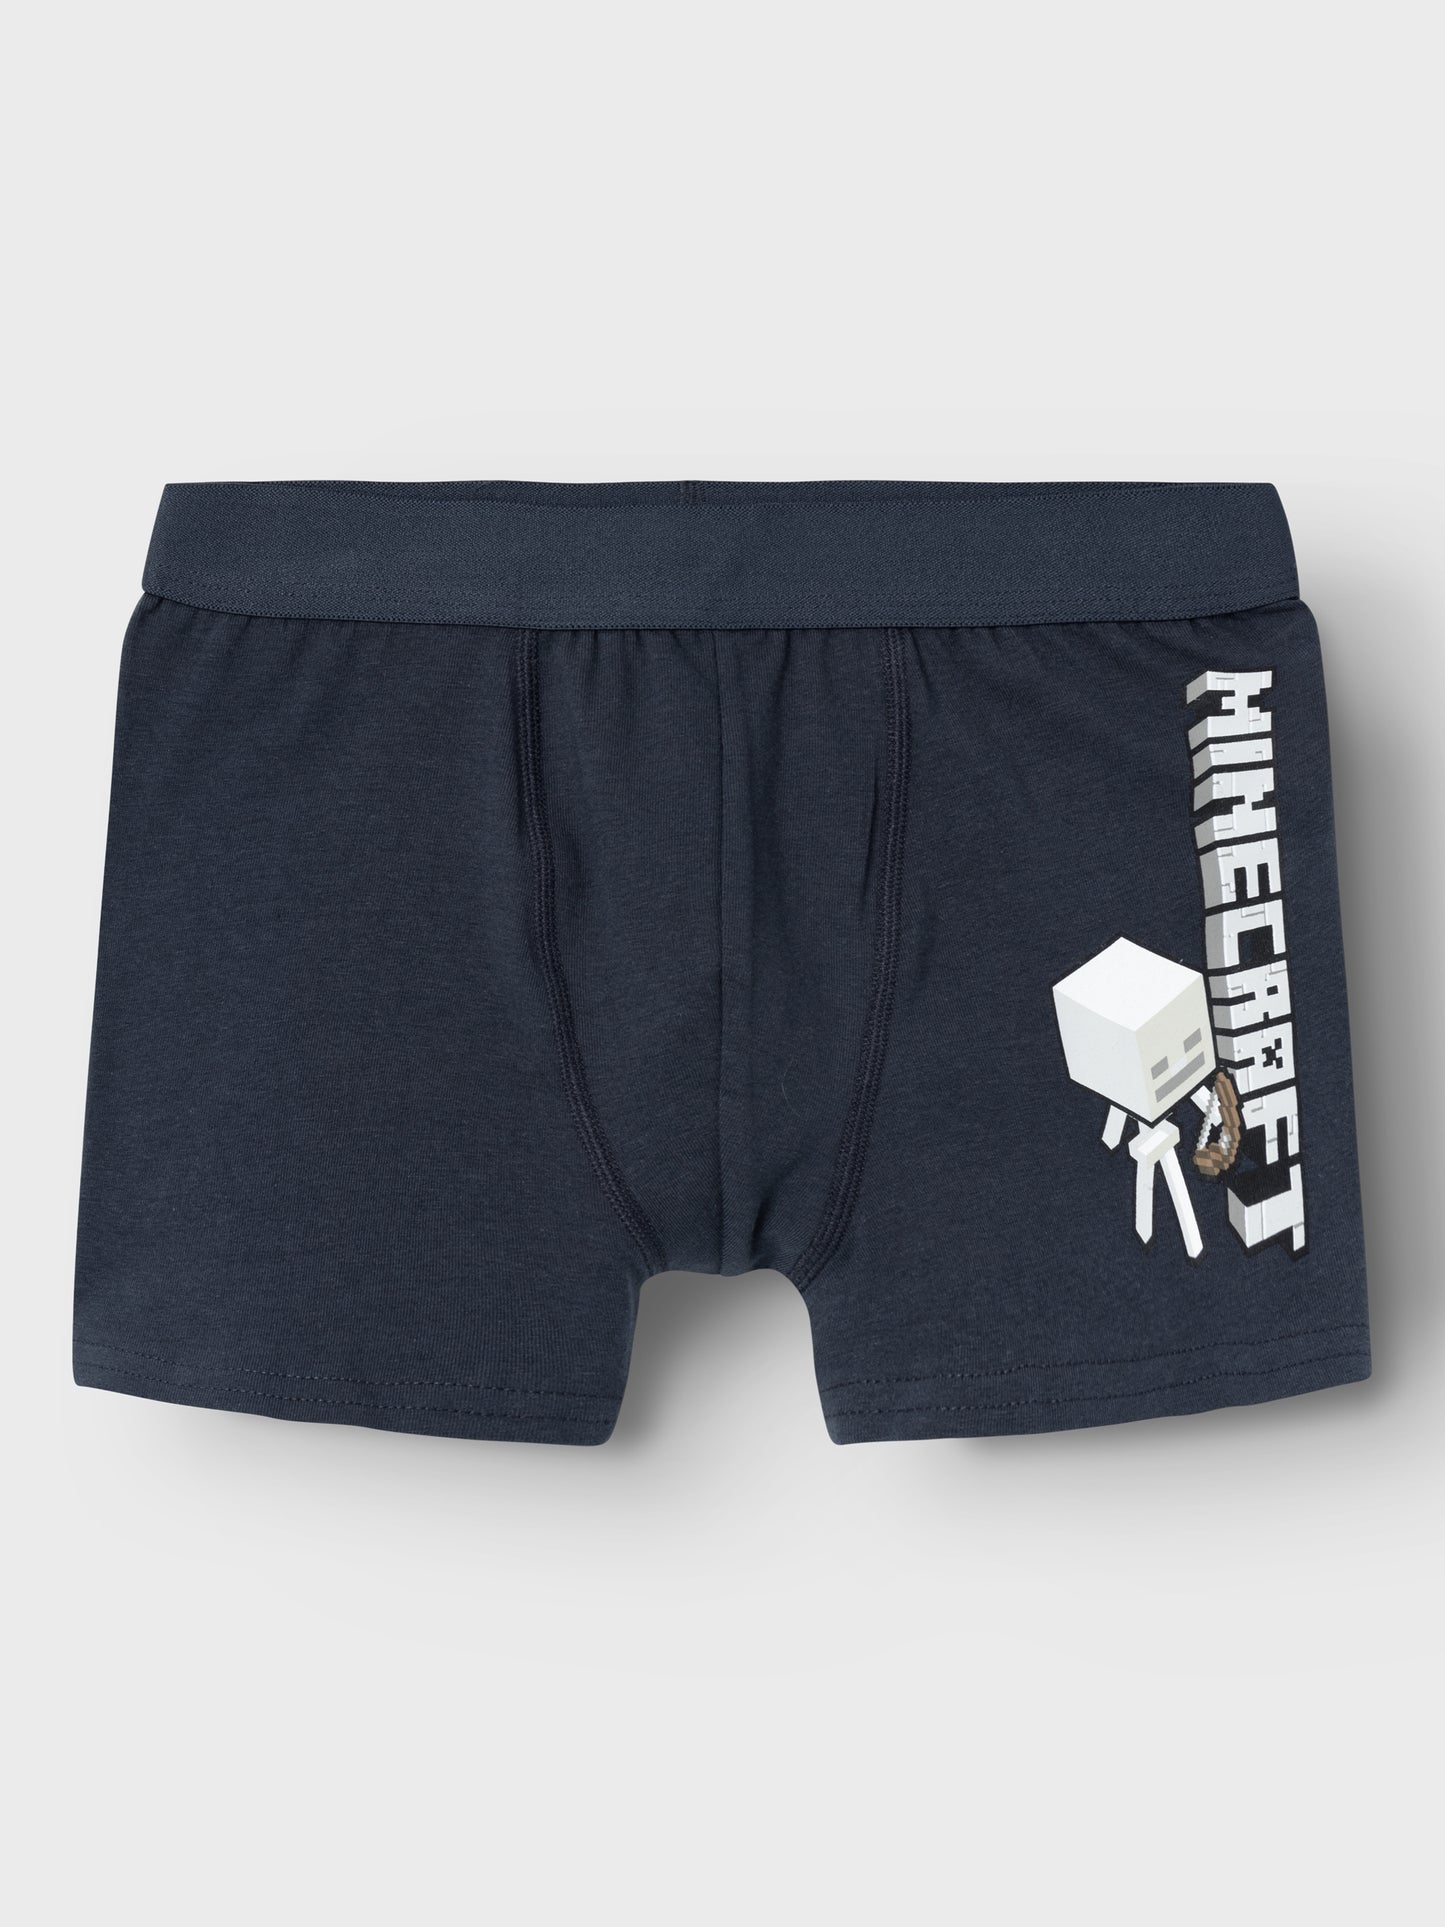 Boxers 2 pack minecraft